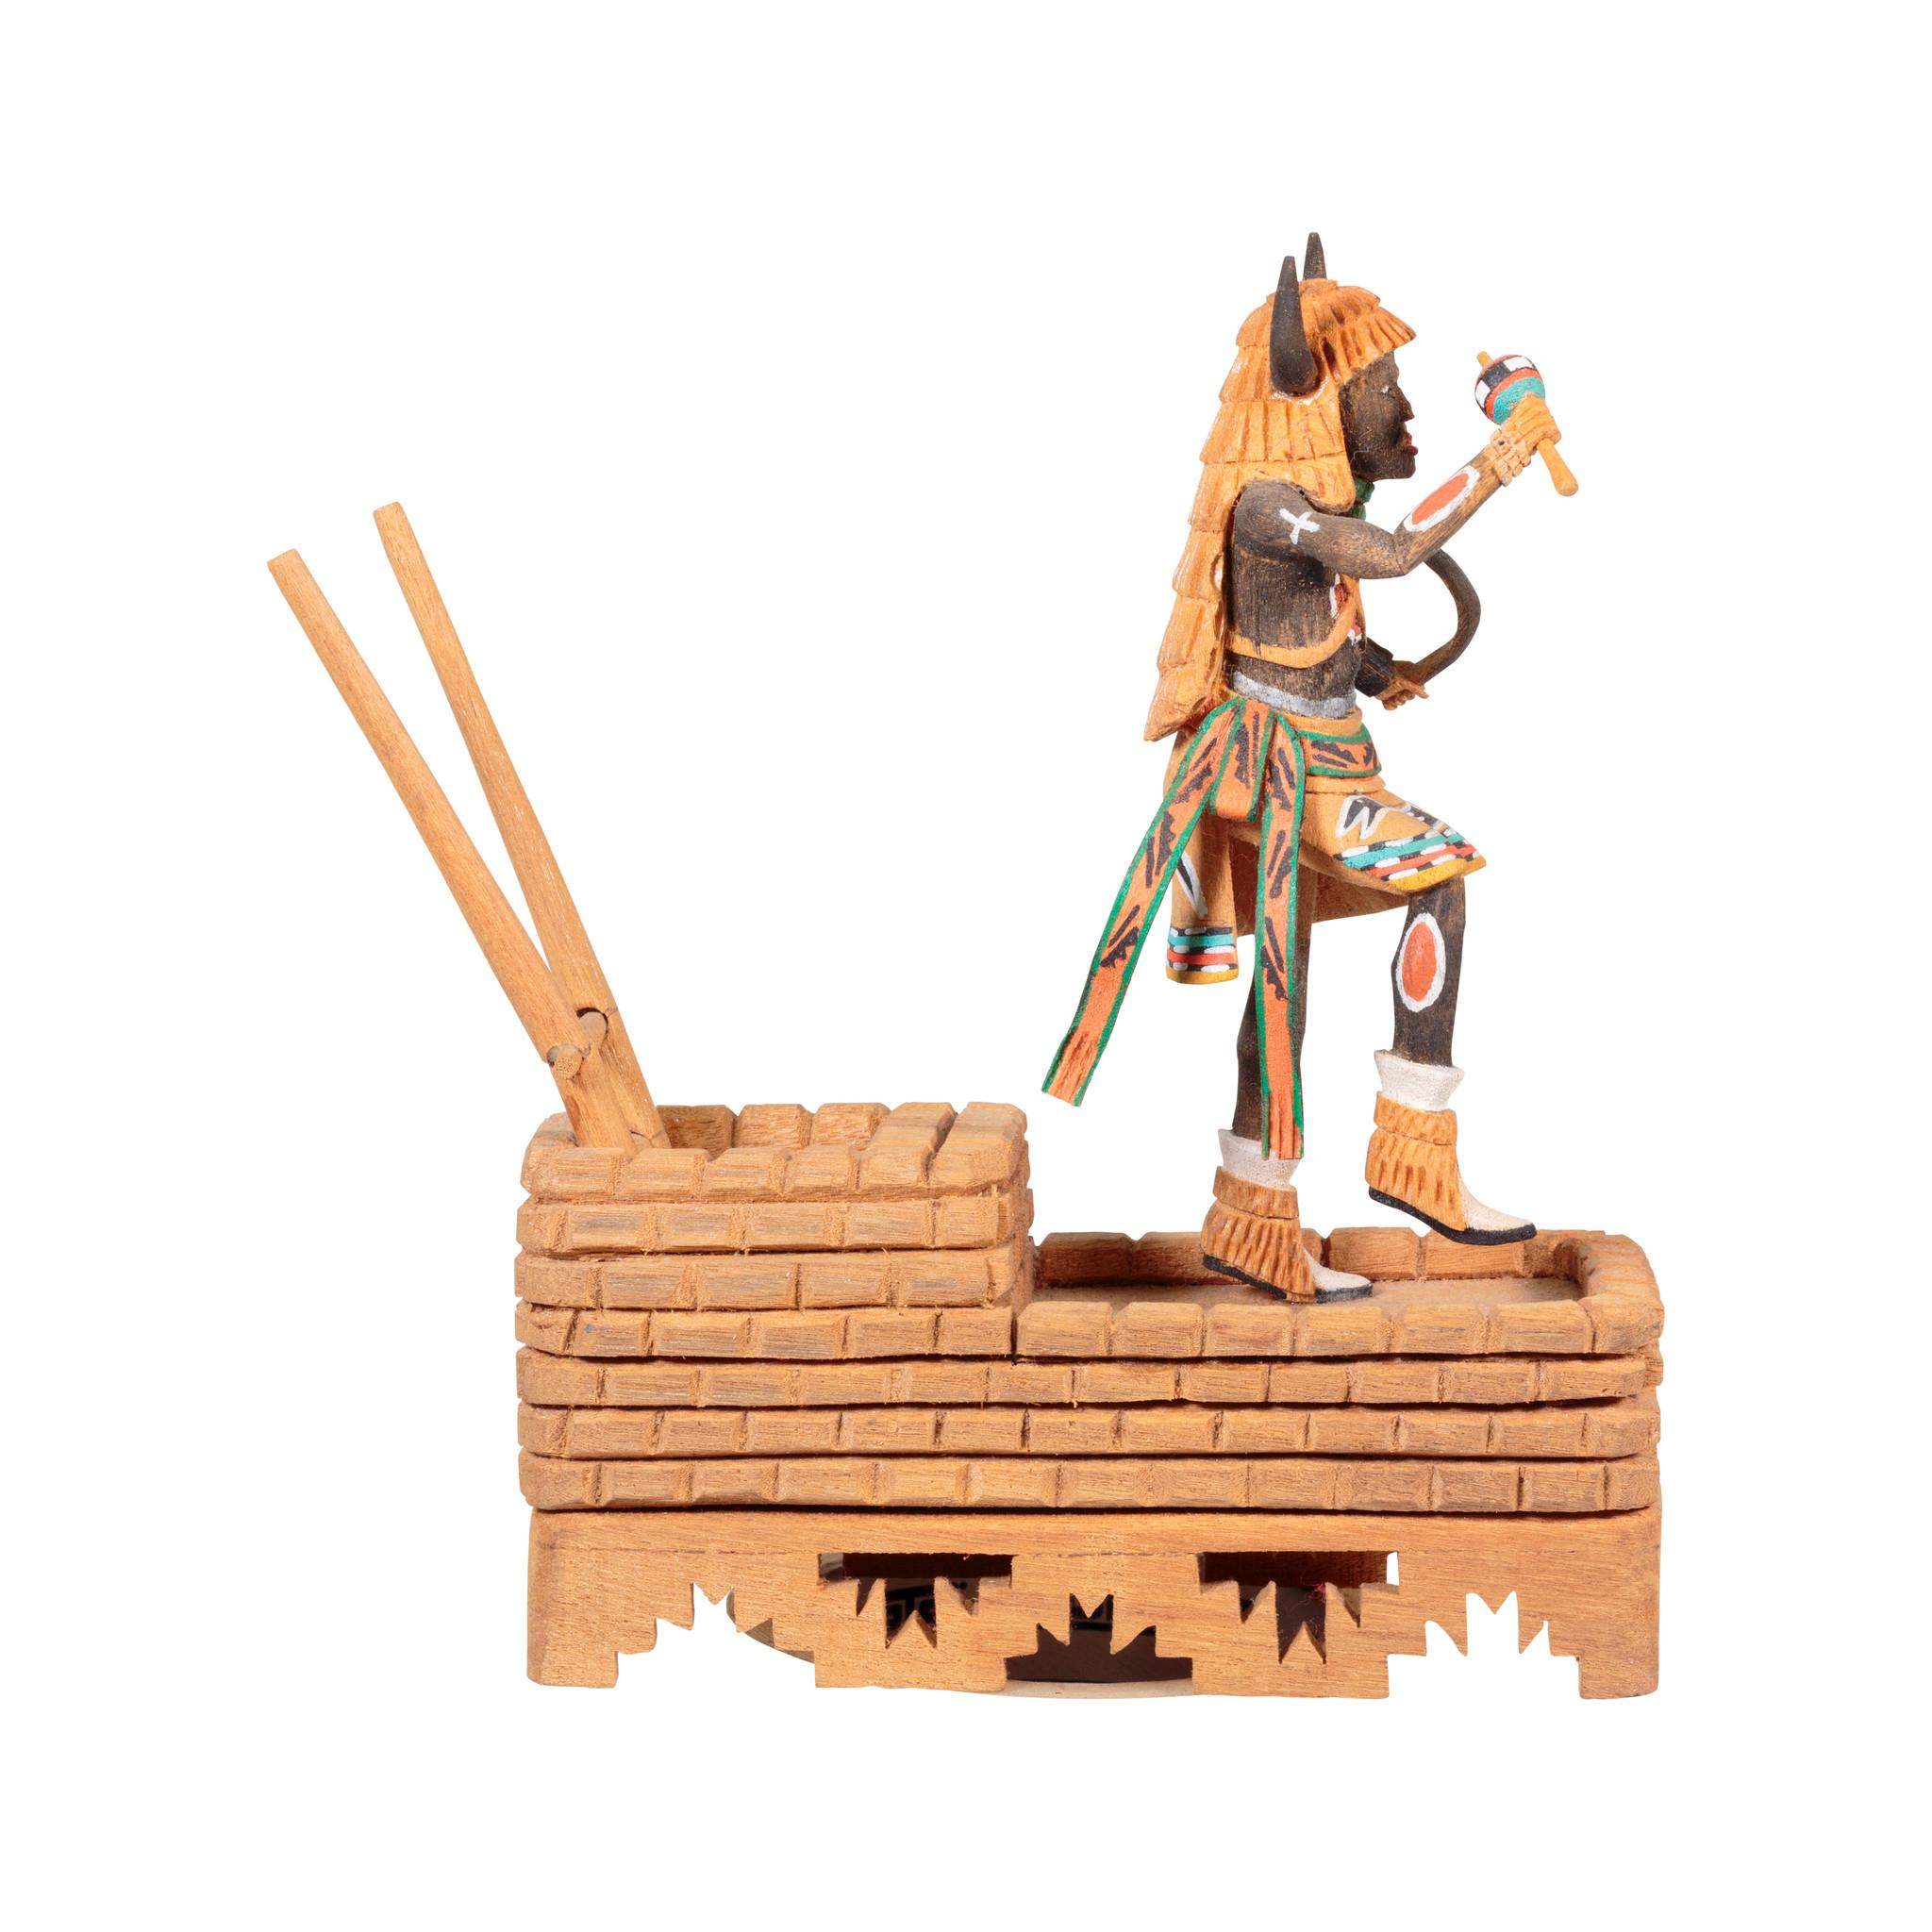 Native American miniature Hopi dance kachina with carved Kiva by Roy Coolidge III.

Period: Last half of the 20th century

Origin: Hopi

Size: 8